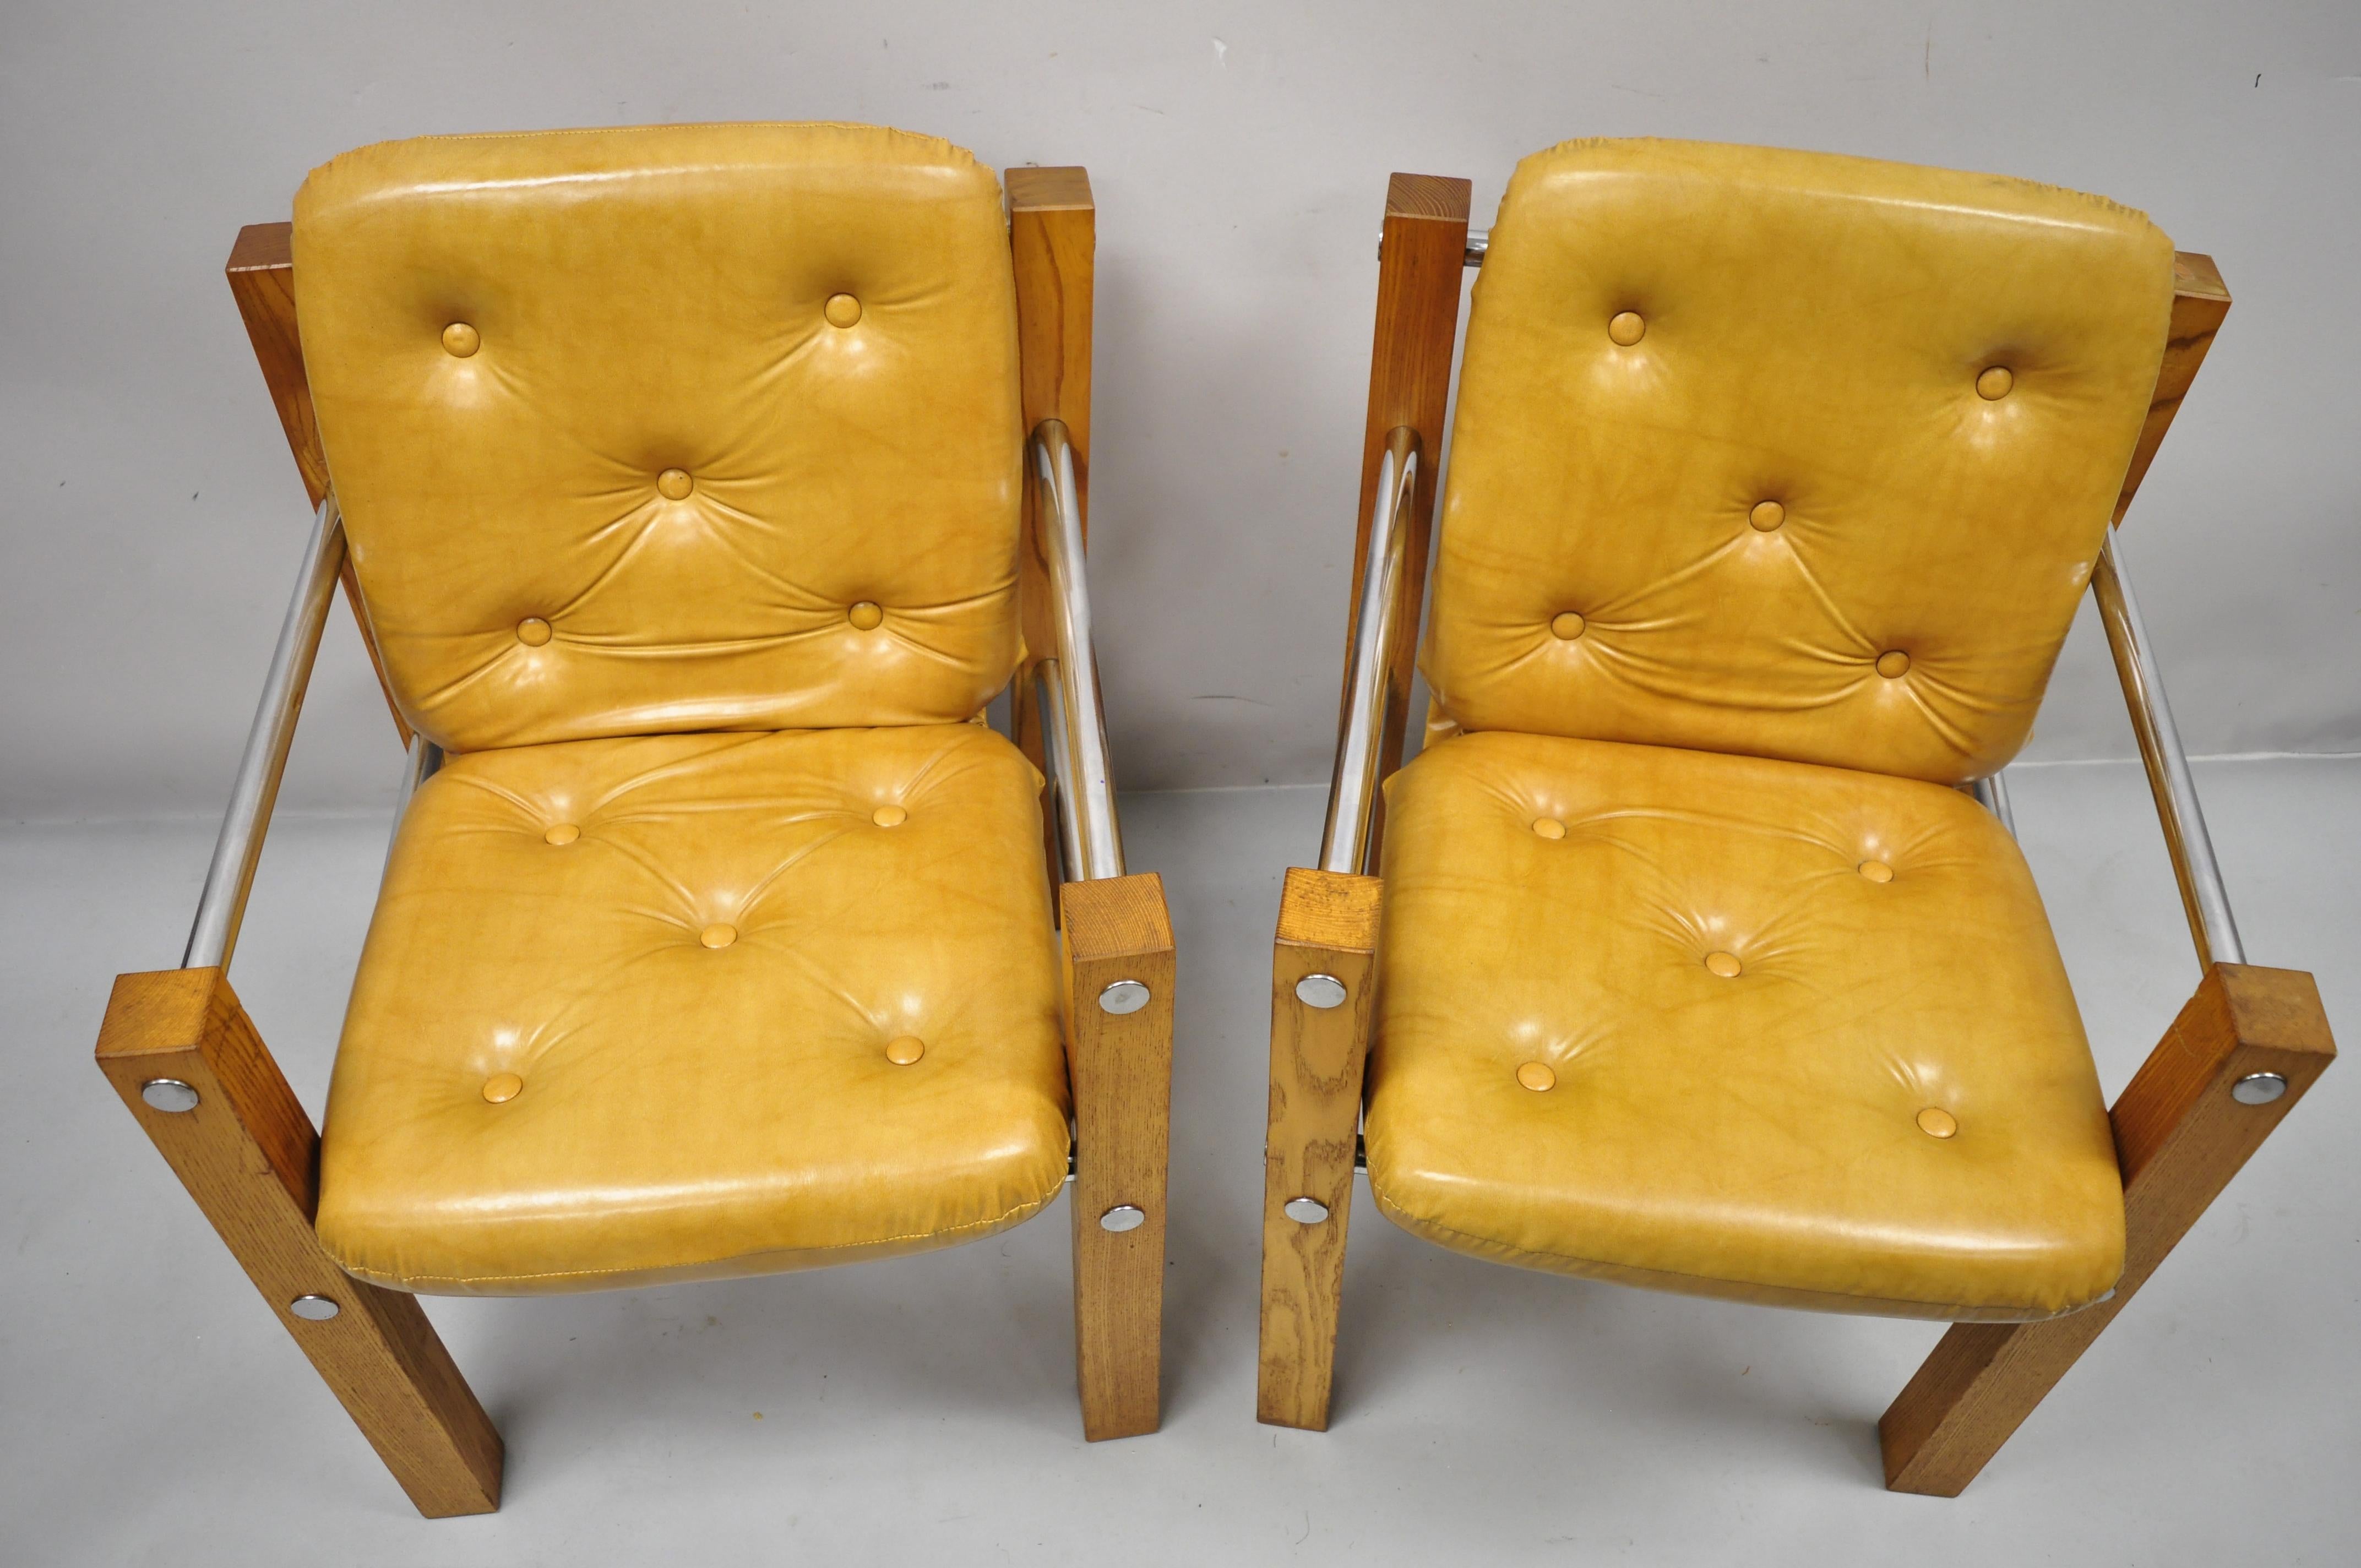 North American Mid-Century Modern Cal Style Inc Oak Chrome Sling Lounge Chairs, a Pair